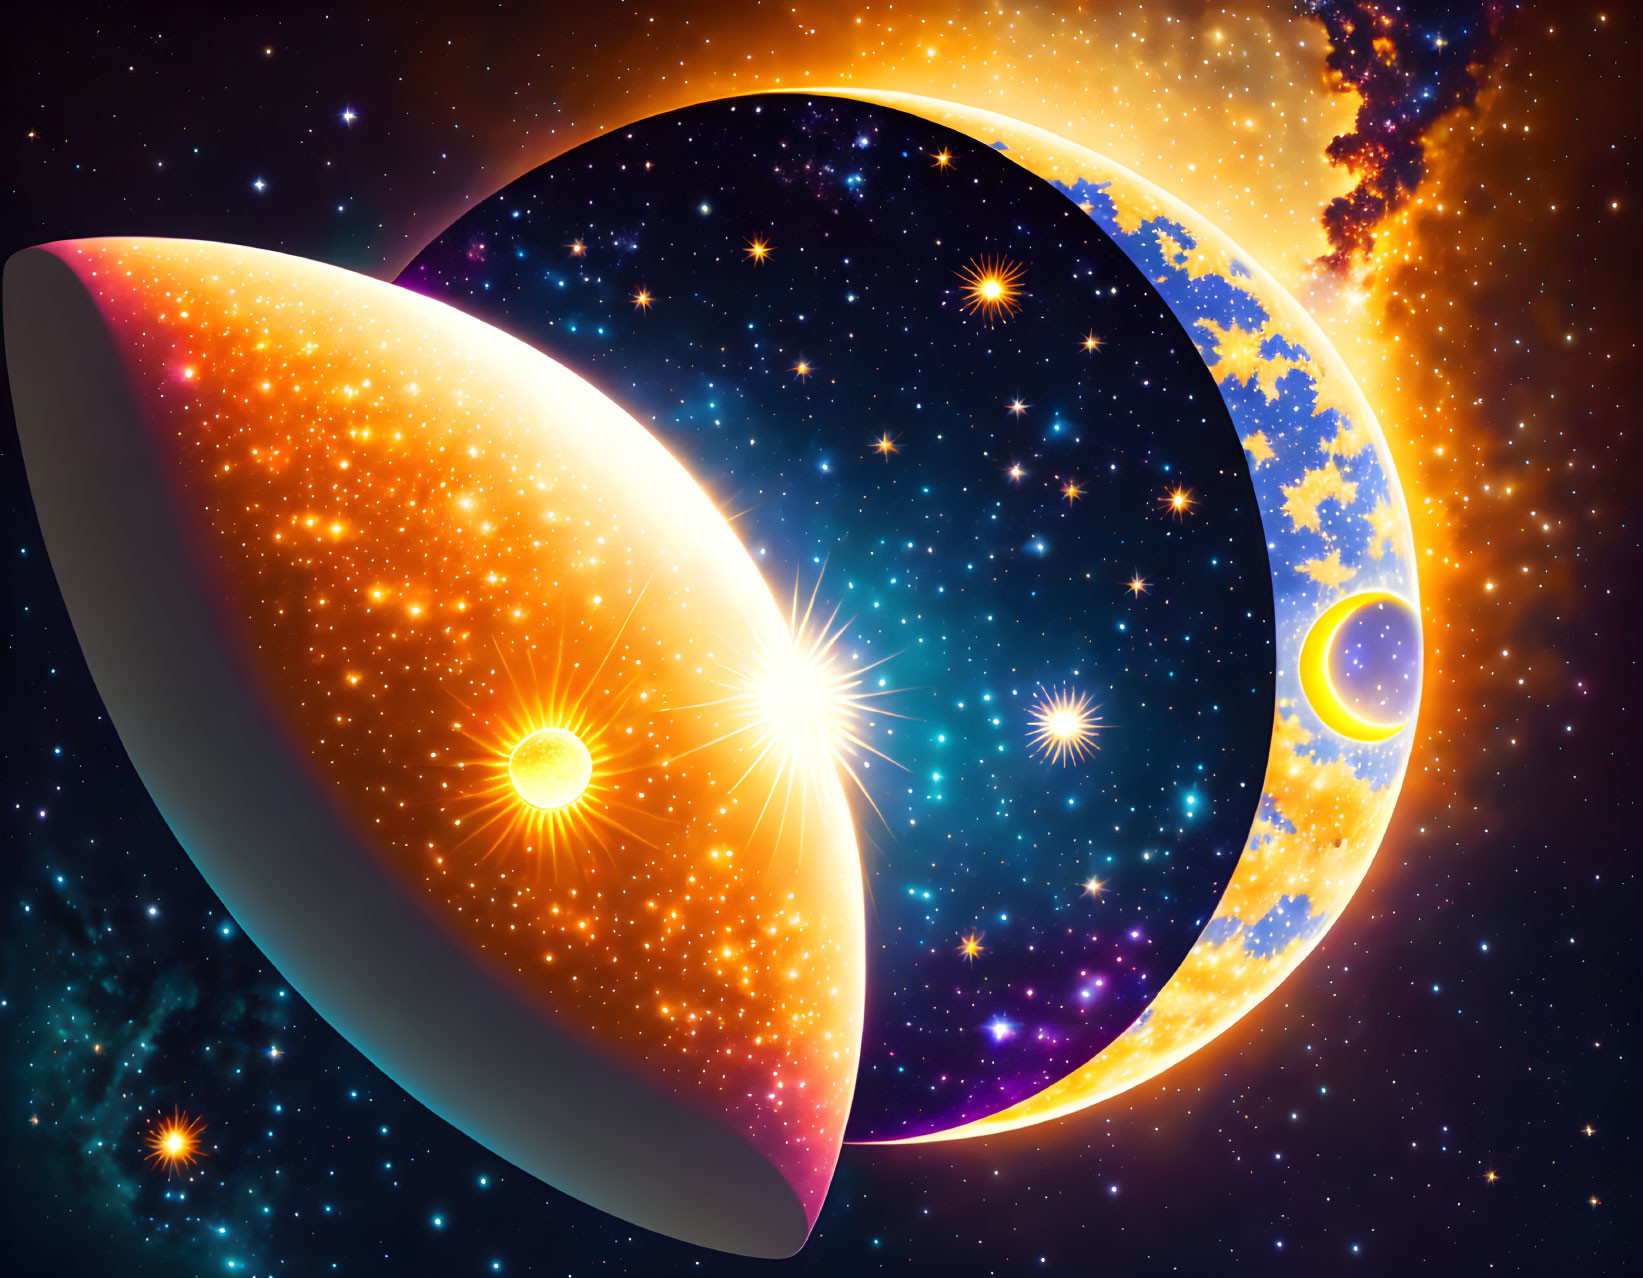 Colorful cosmic digital artwork with crescent moon and star-filled skies